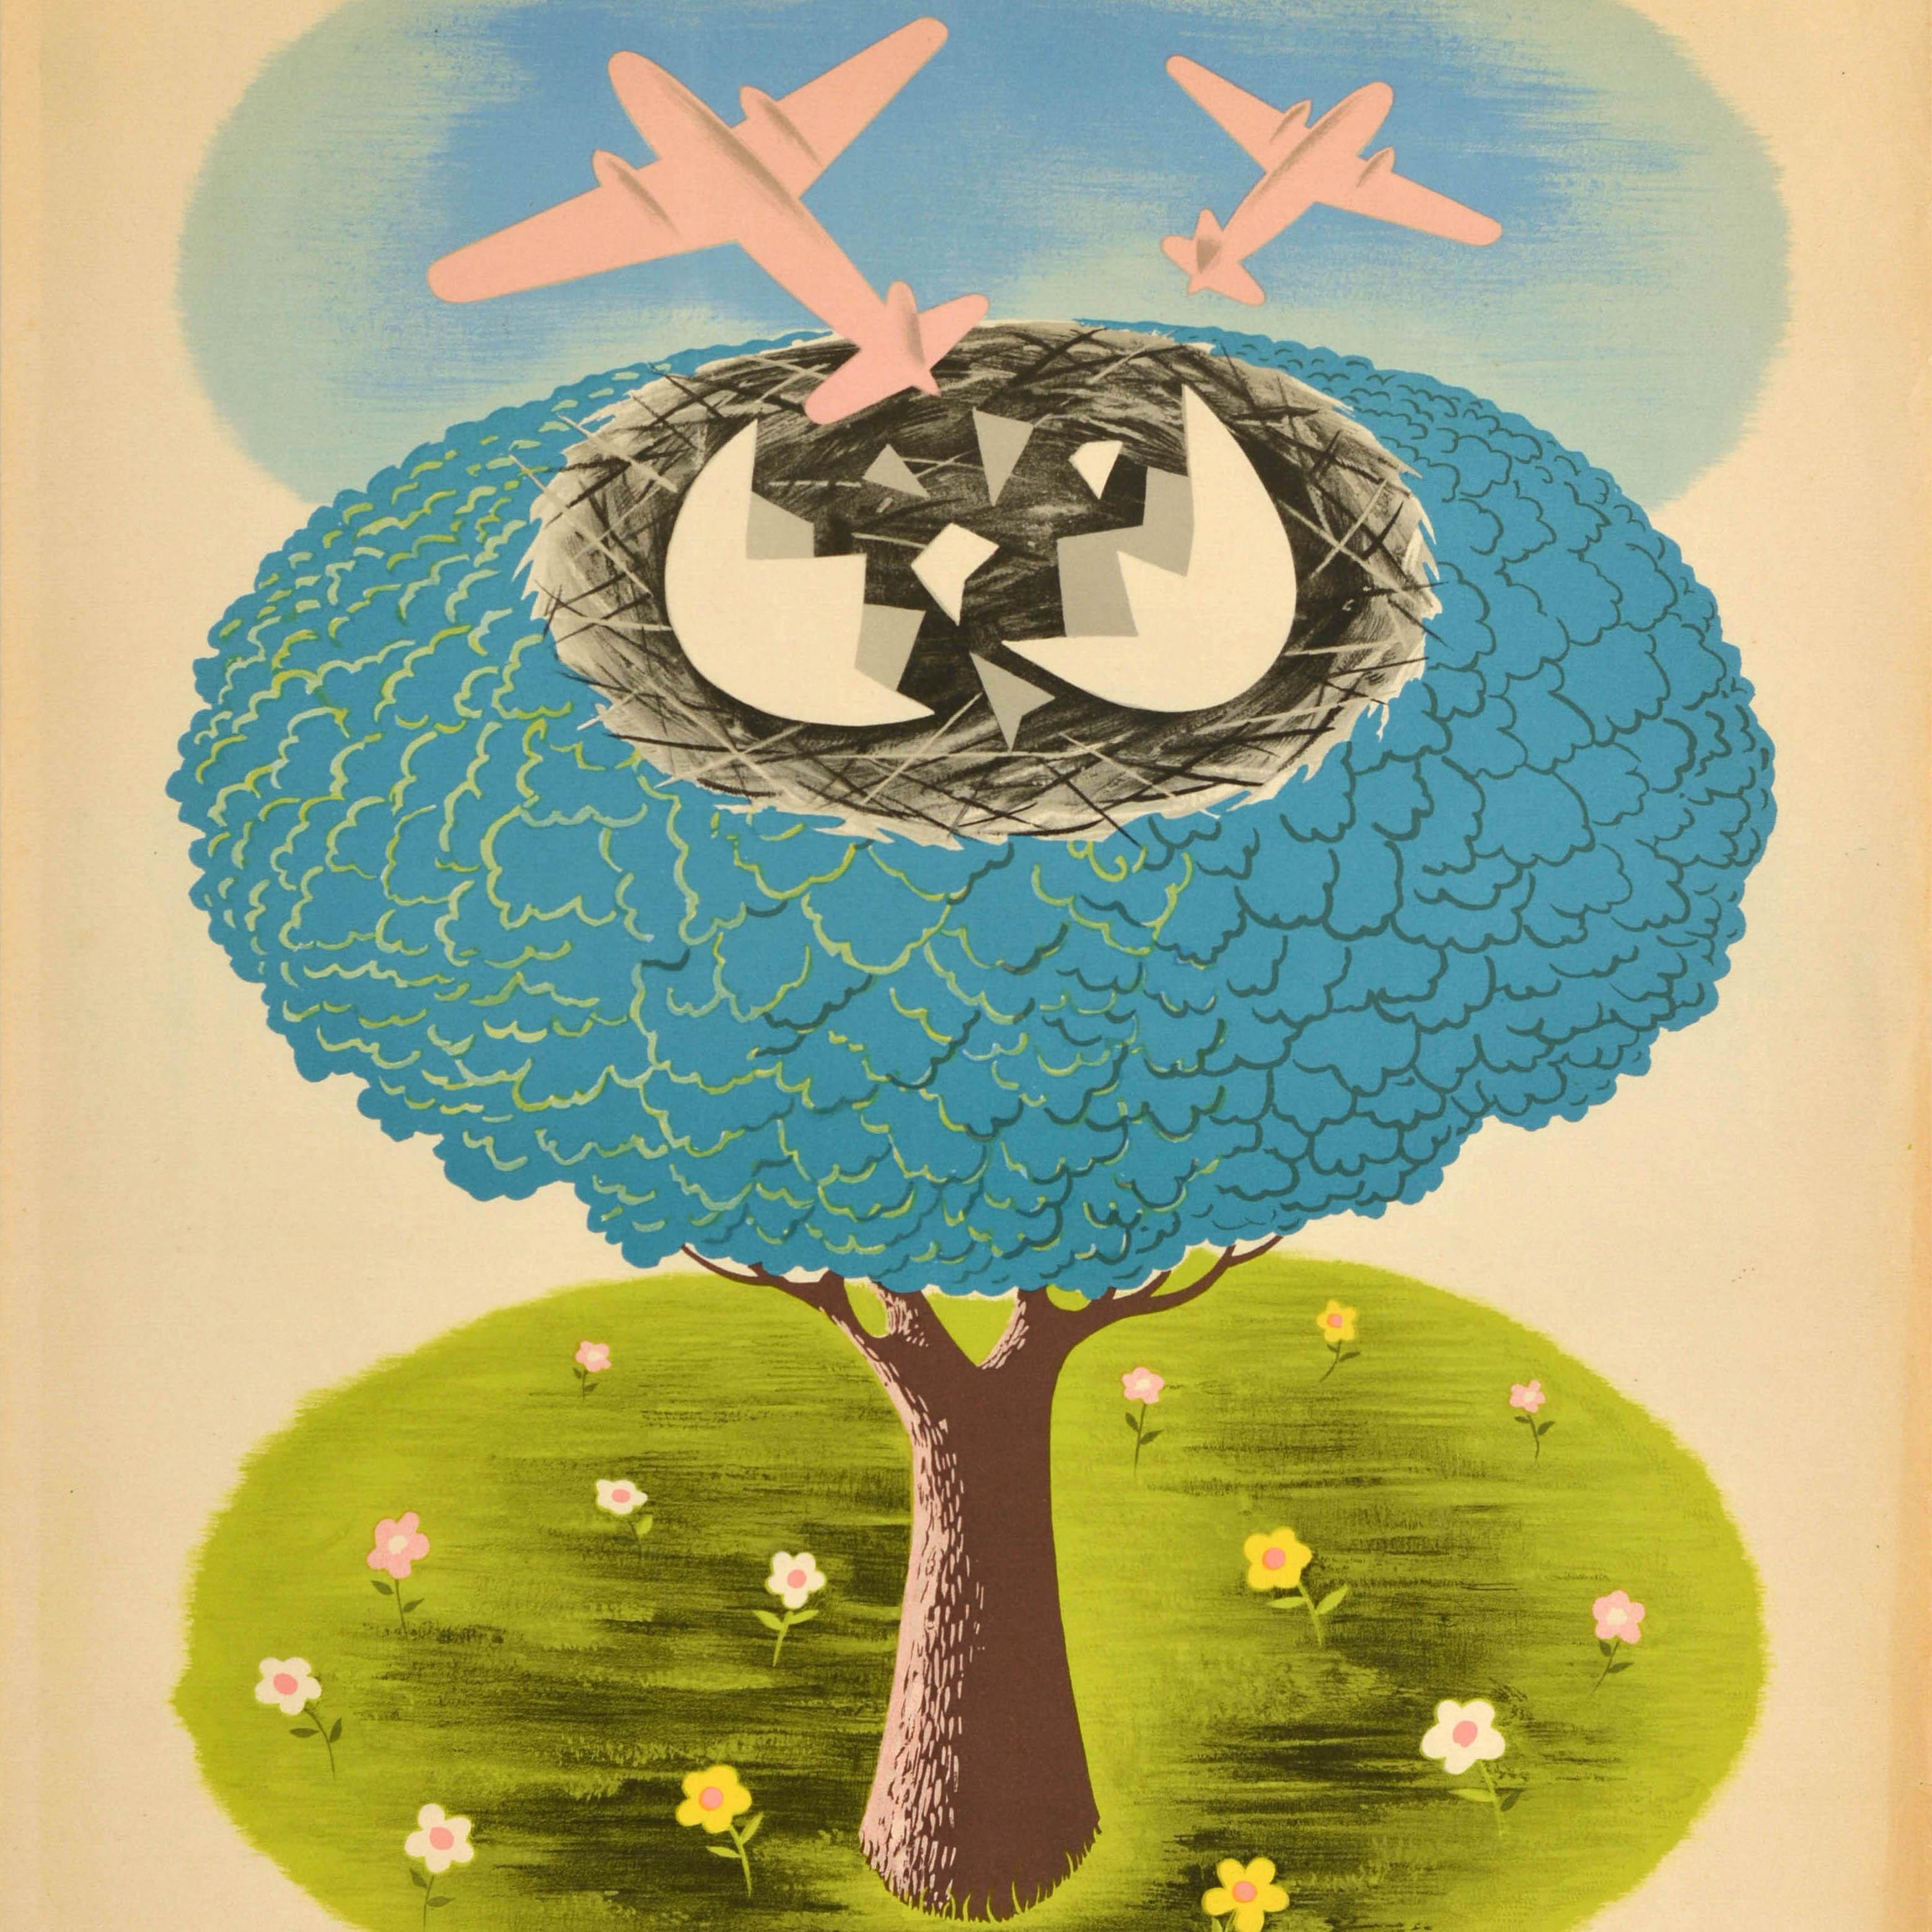 Original vintage travel poster - BEA Holiday Services take you there and bring you back British European Airways - featuring a great illustration depicting two planes flying up into the blue sky from a tree as if hatching from eggs in a nest with